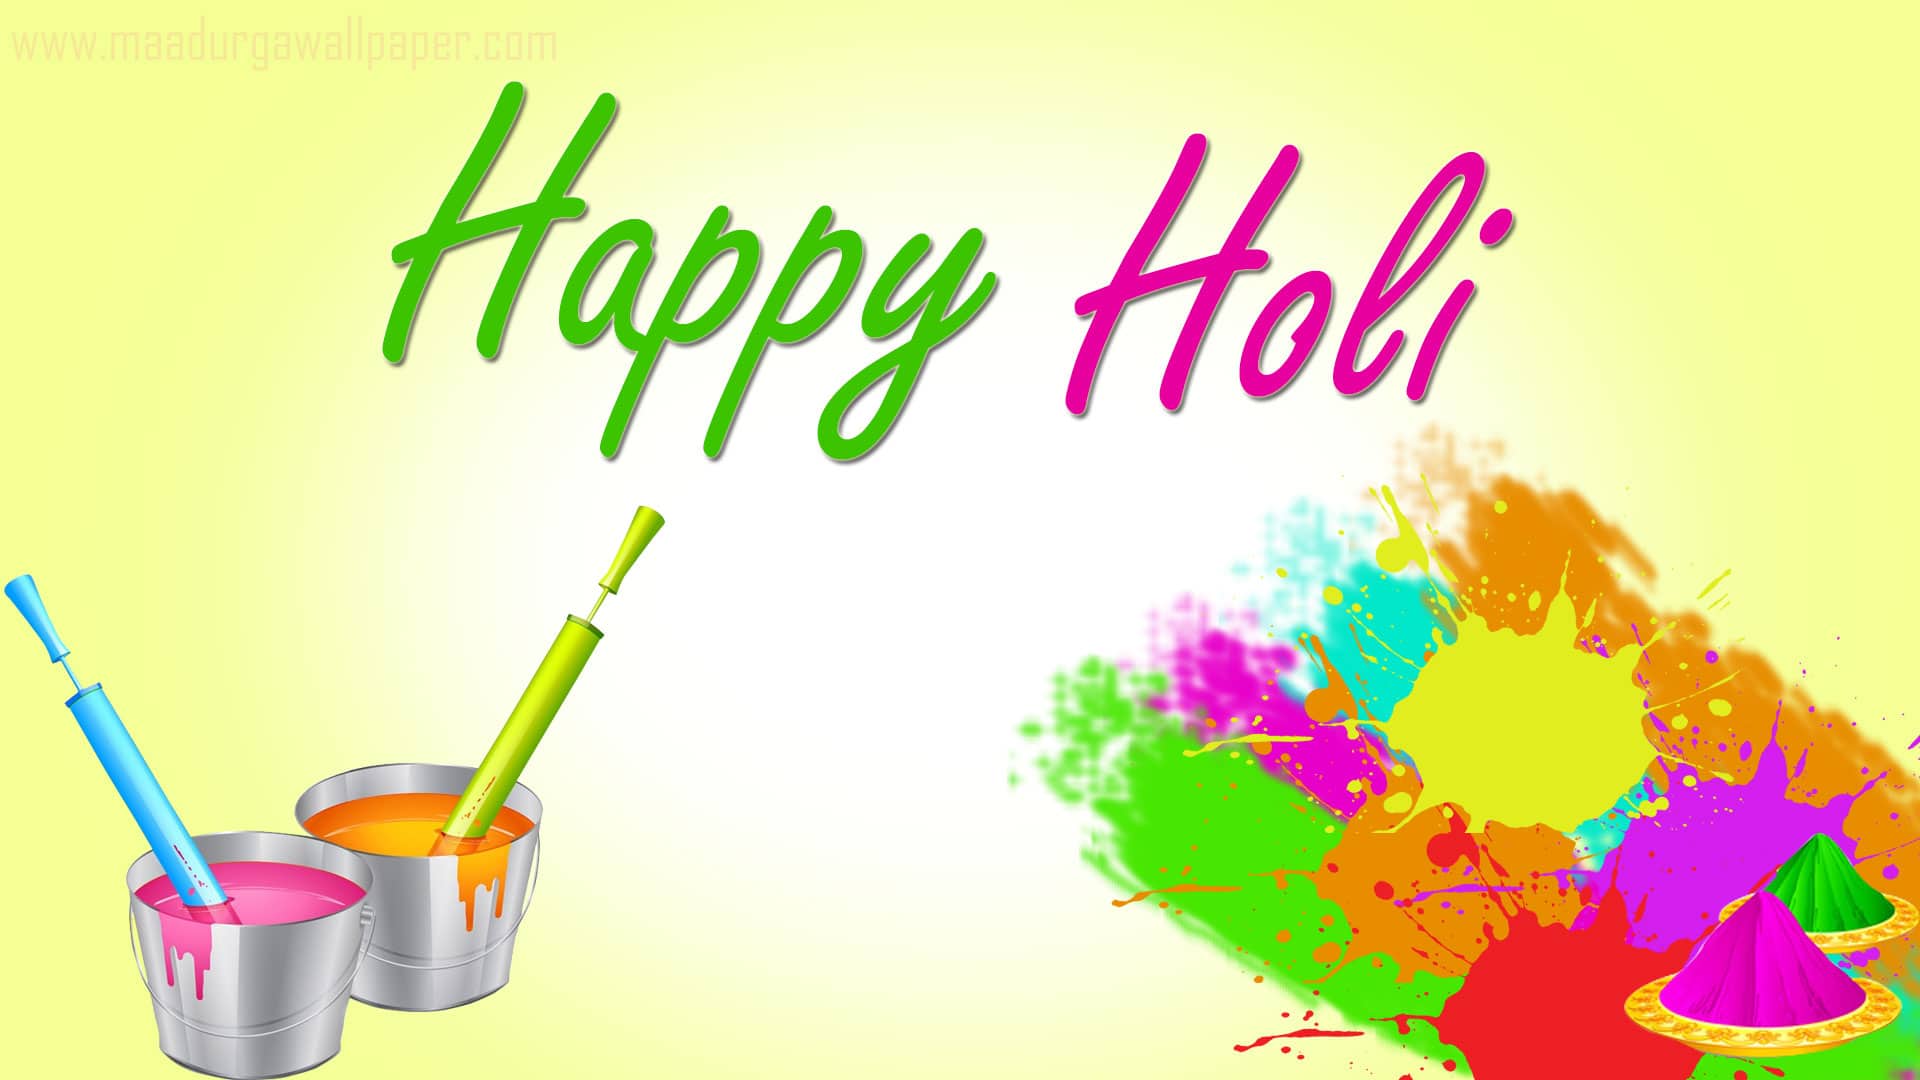 Happy Holi 2019 HD Image & Wallpaper with Wishes, Greeting